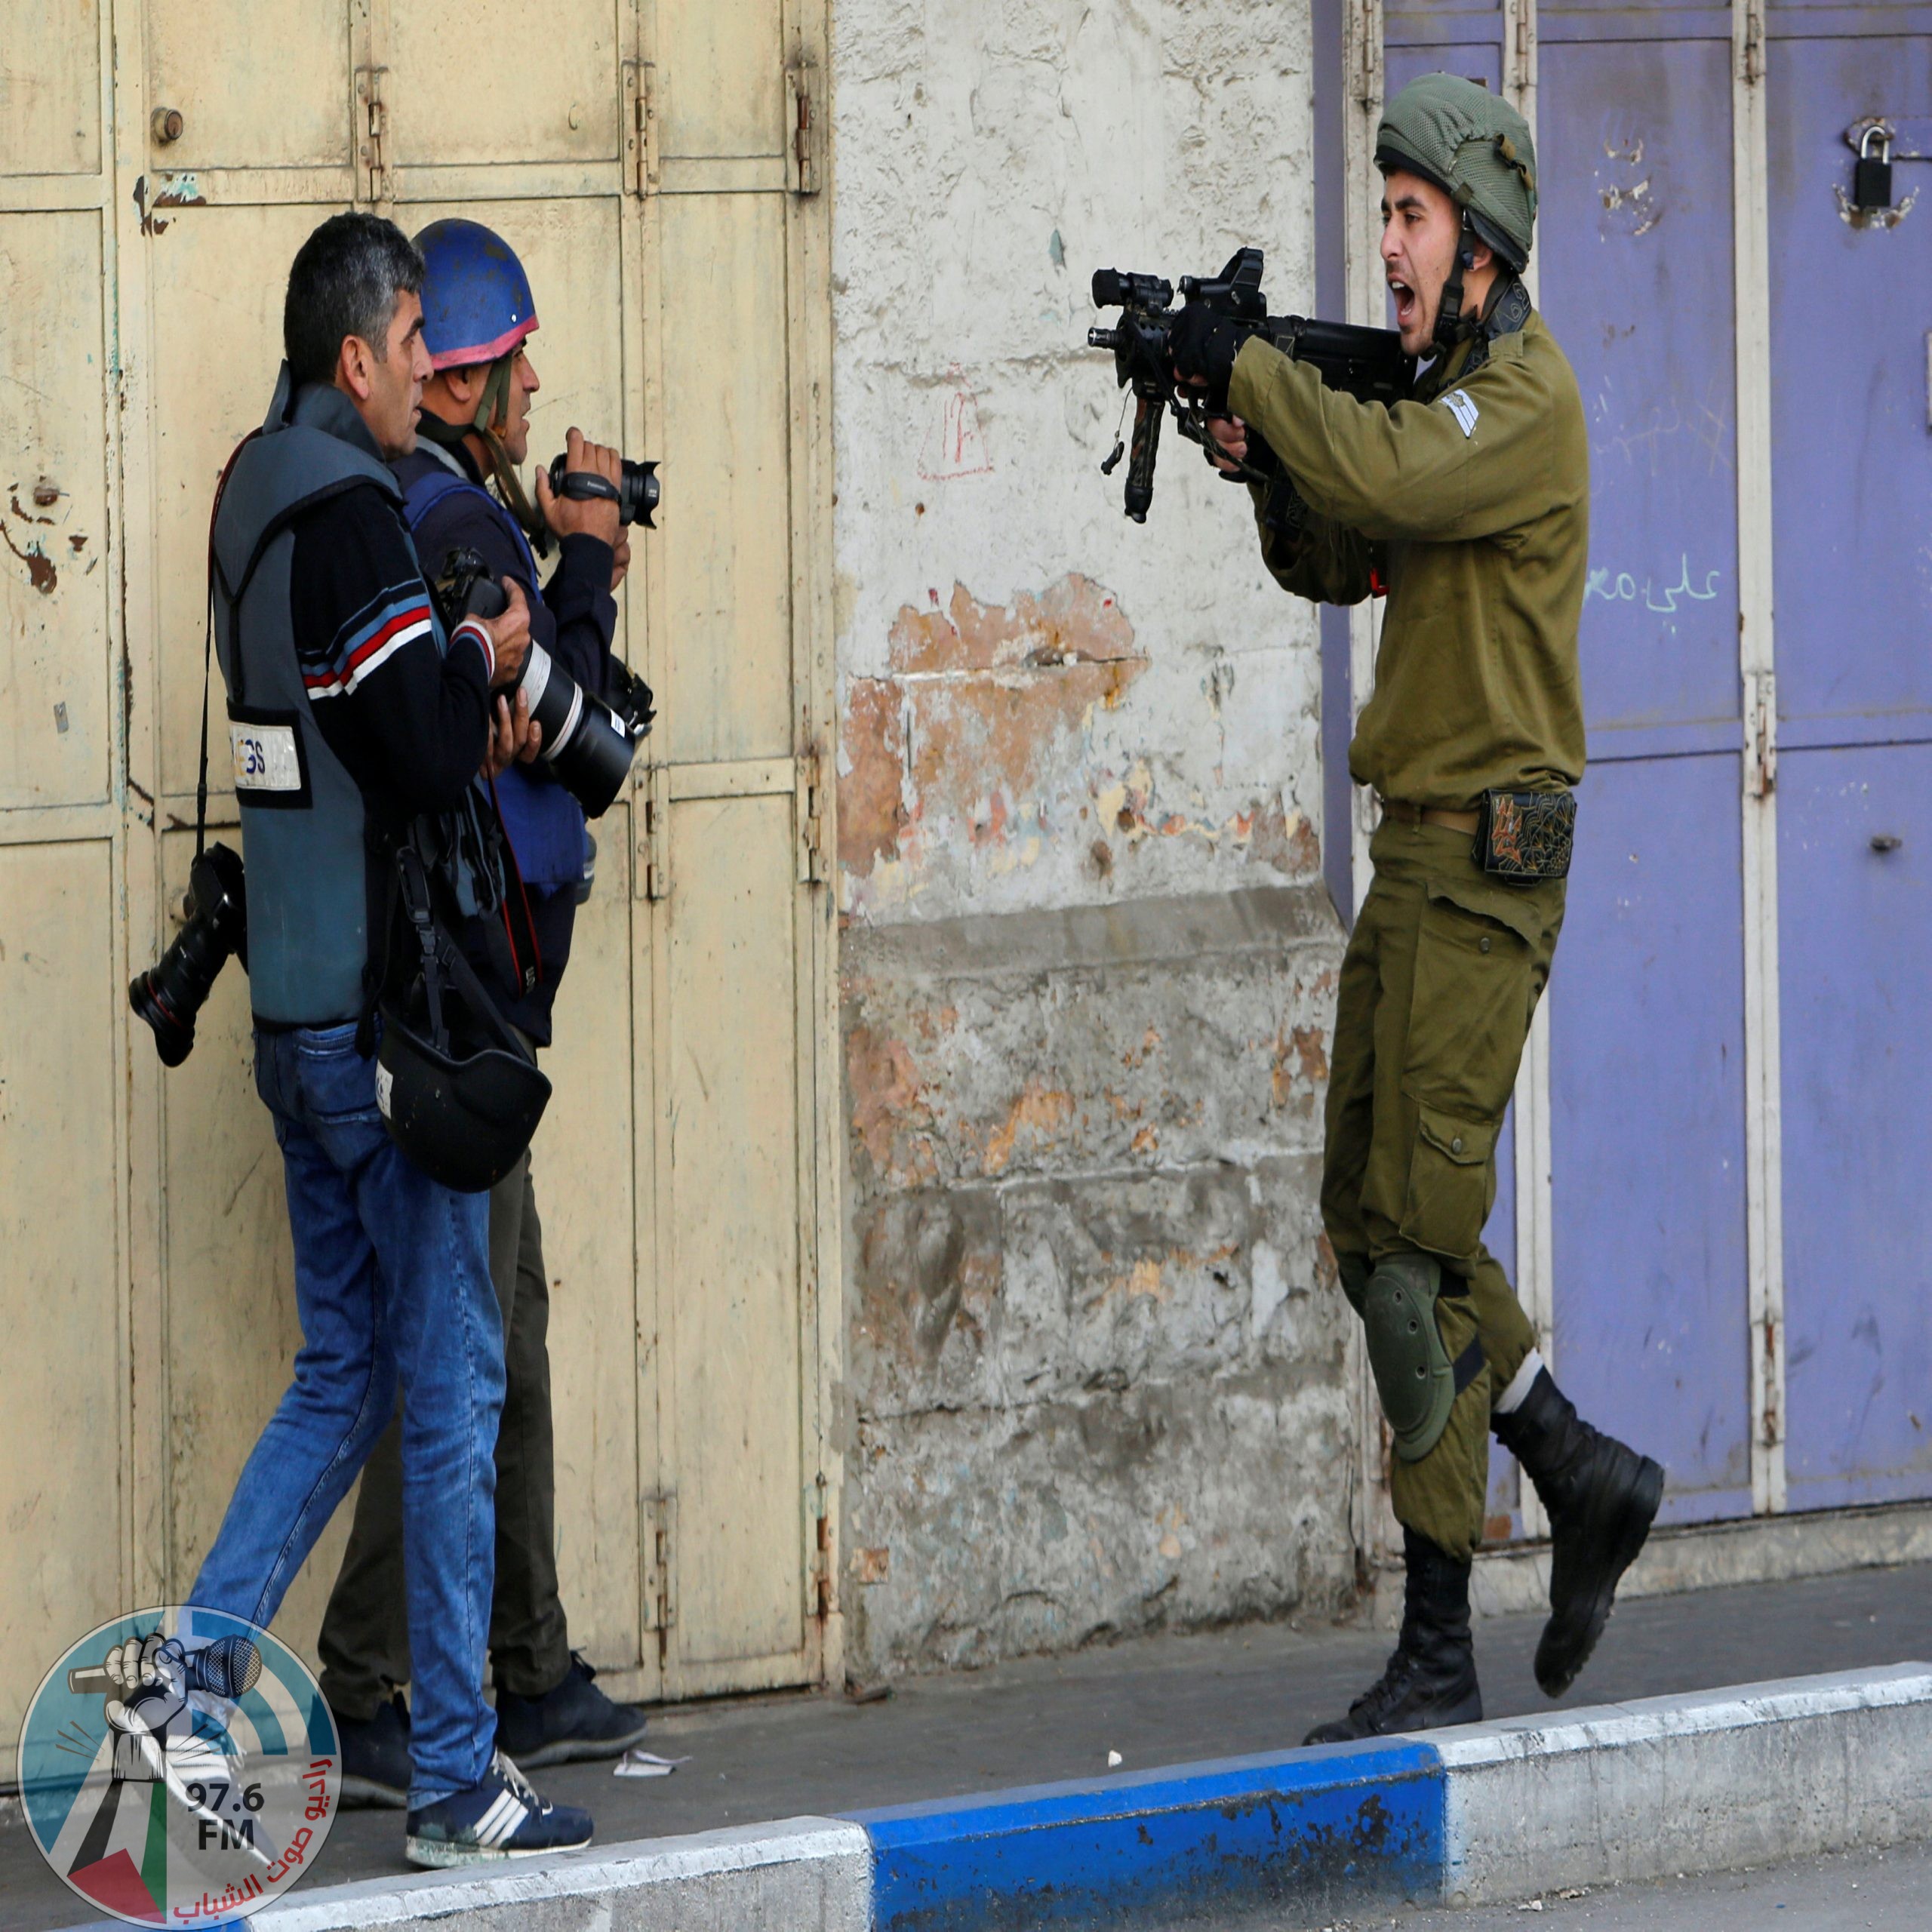 An Israeli soldier shouts as he aims his weapon during clashes with Palestinian demonstrators at a protest against U.S. President Donald Trump's decision to recognise Jerusalem as the capital of Israel, in the West Bank city of Hebron December 15, 2017. REUTERS/Mussa Qawasma